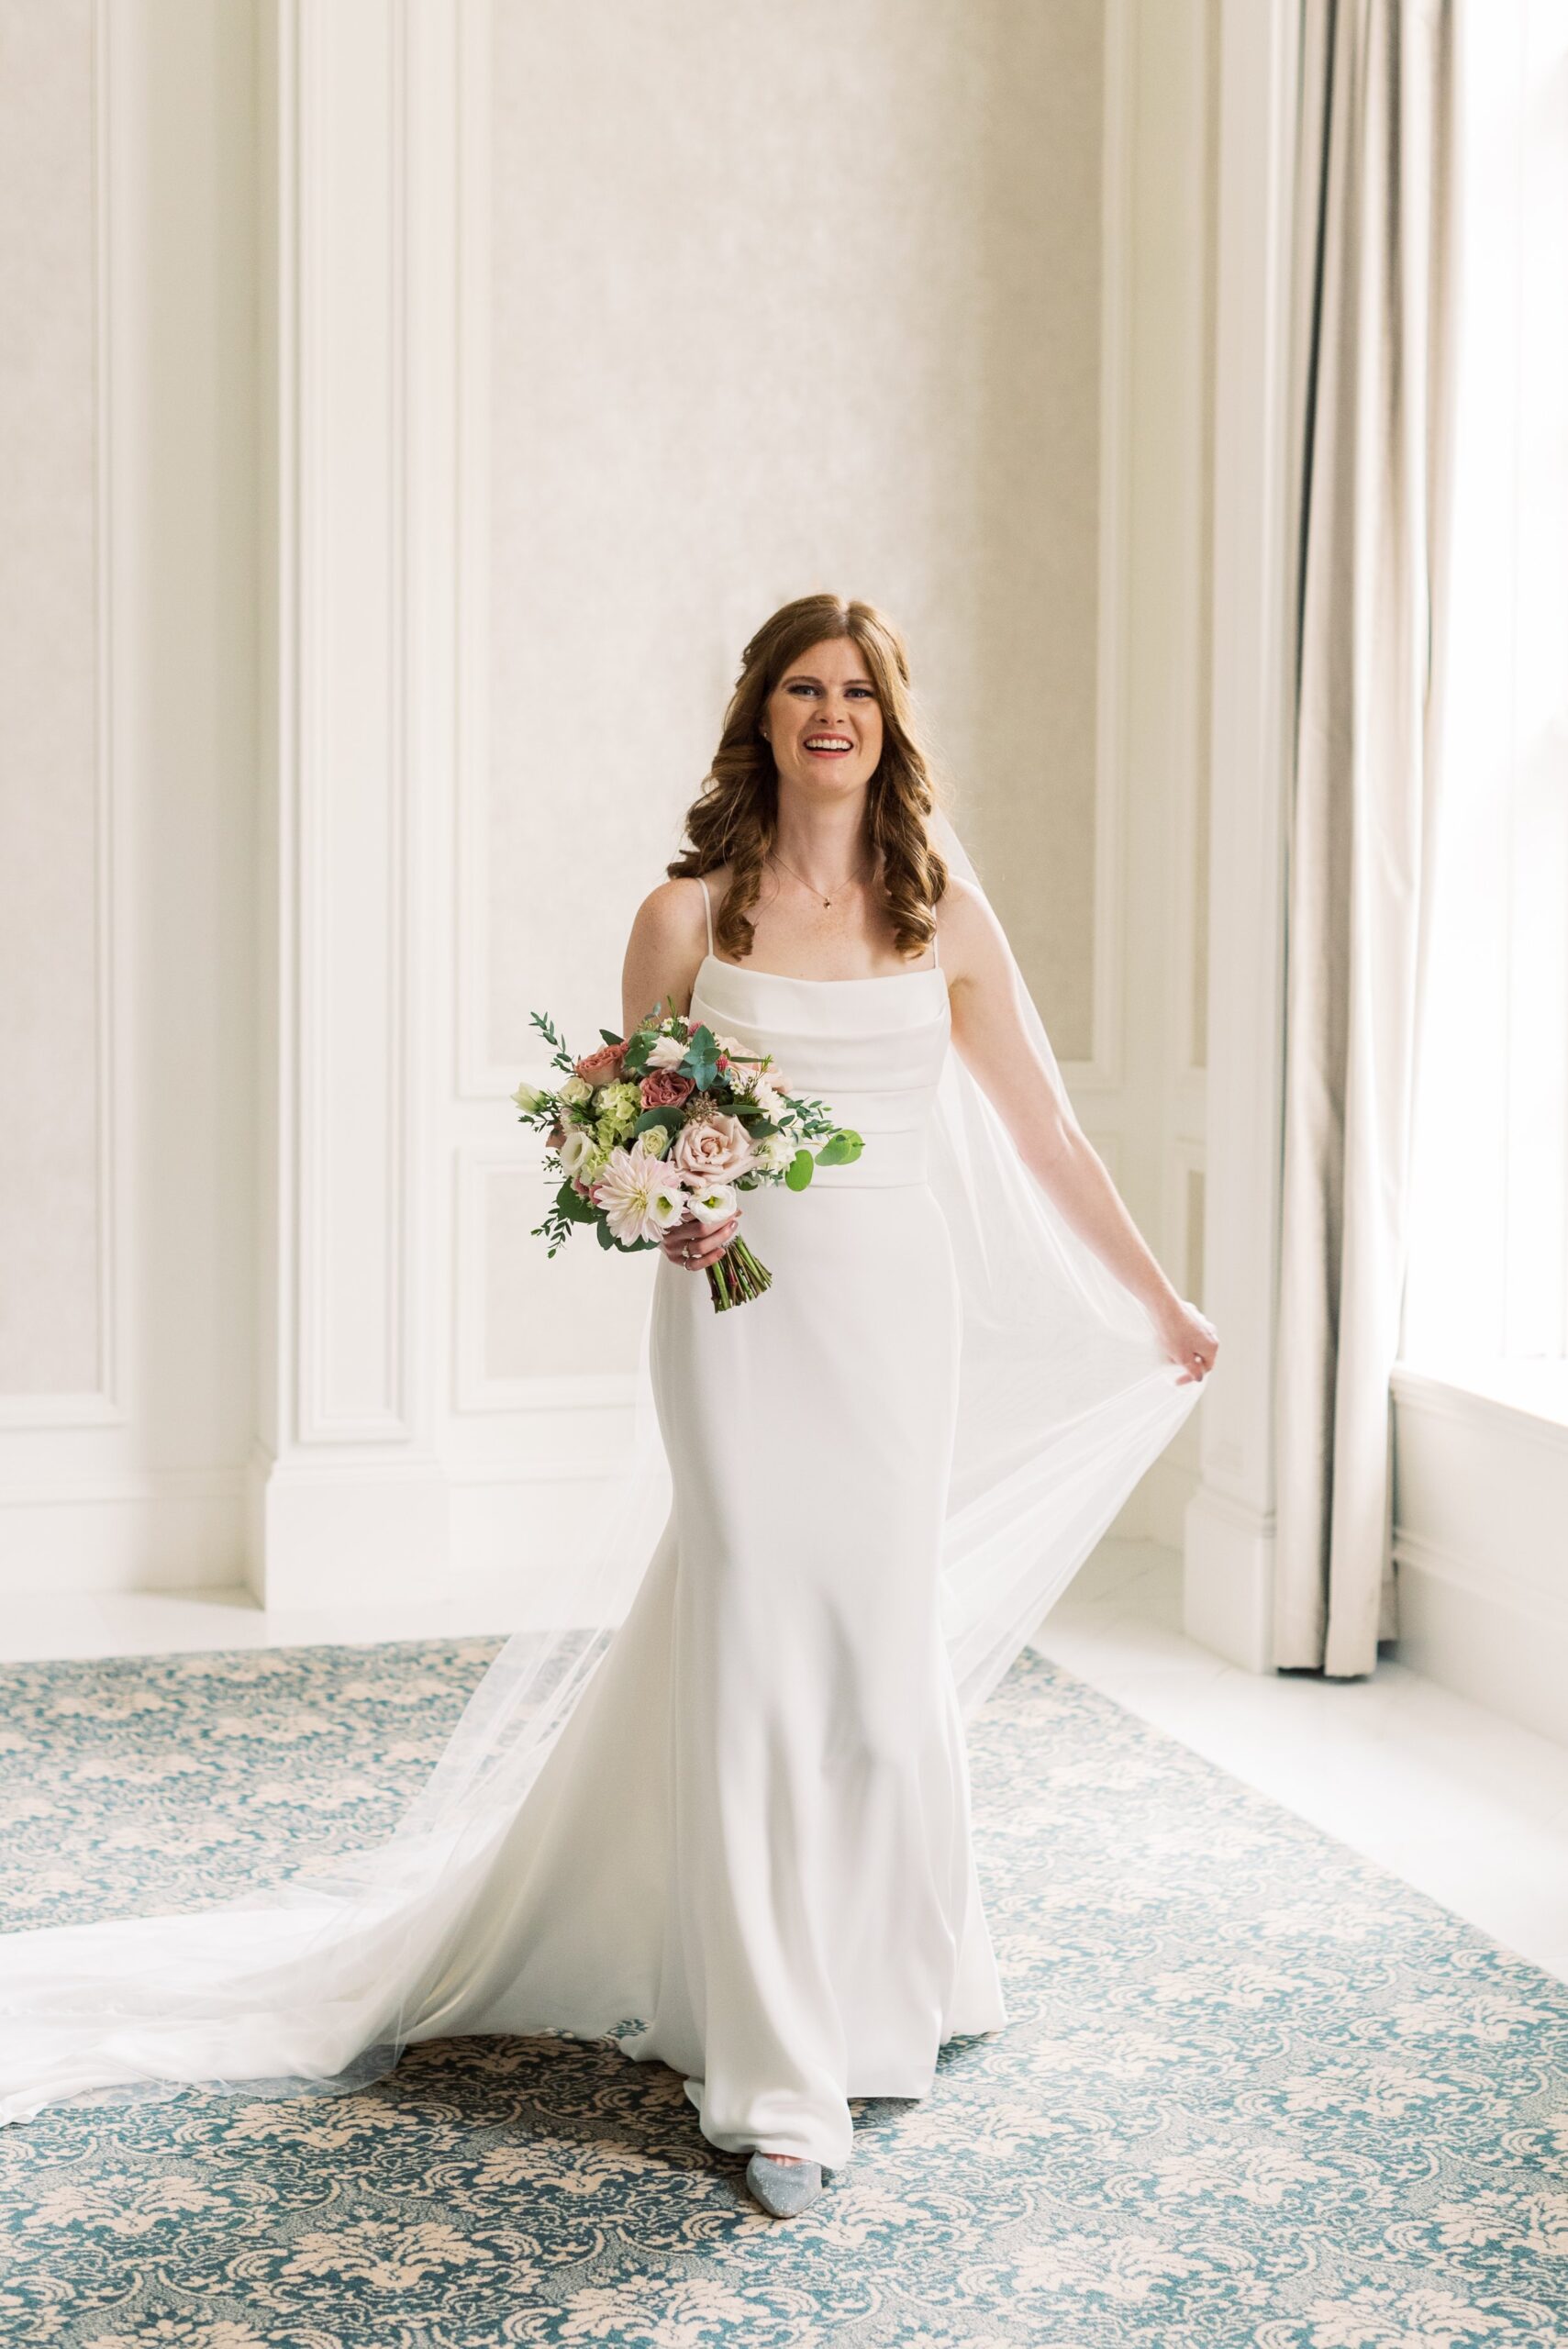 Bridal portrait at Lord Nelson Hotel